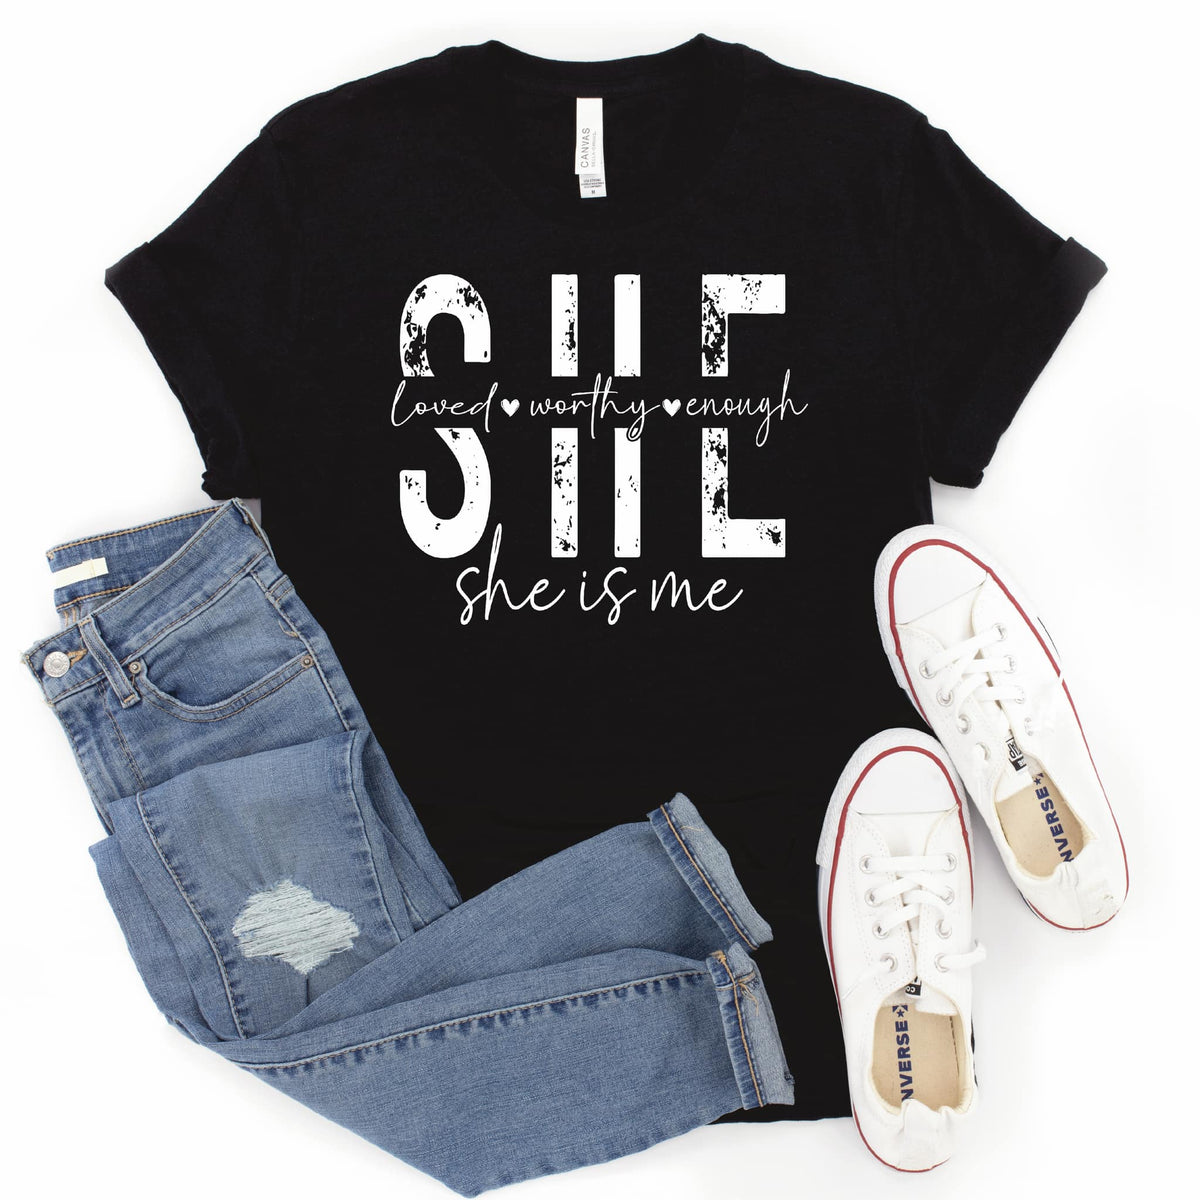 She is me GRAPHIC TEE allow 7 days to process + shipping time